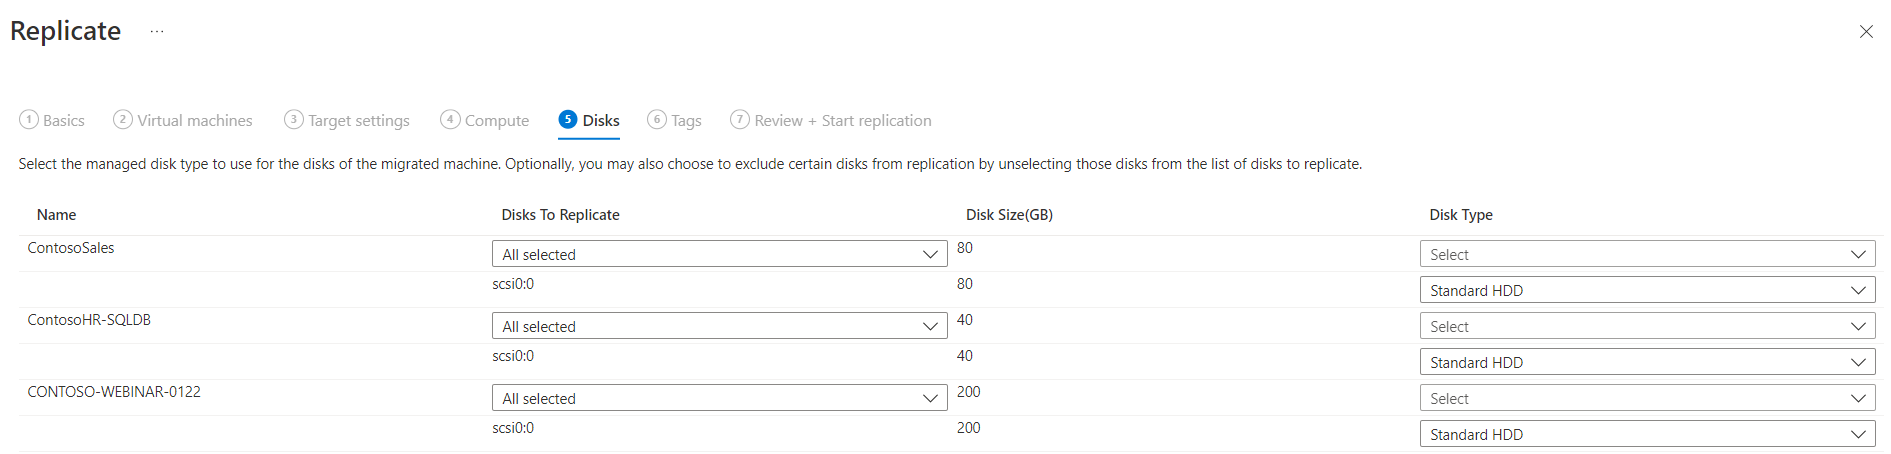 Screenshot that shows the Disks tab in the Replicate dialog.